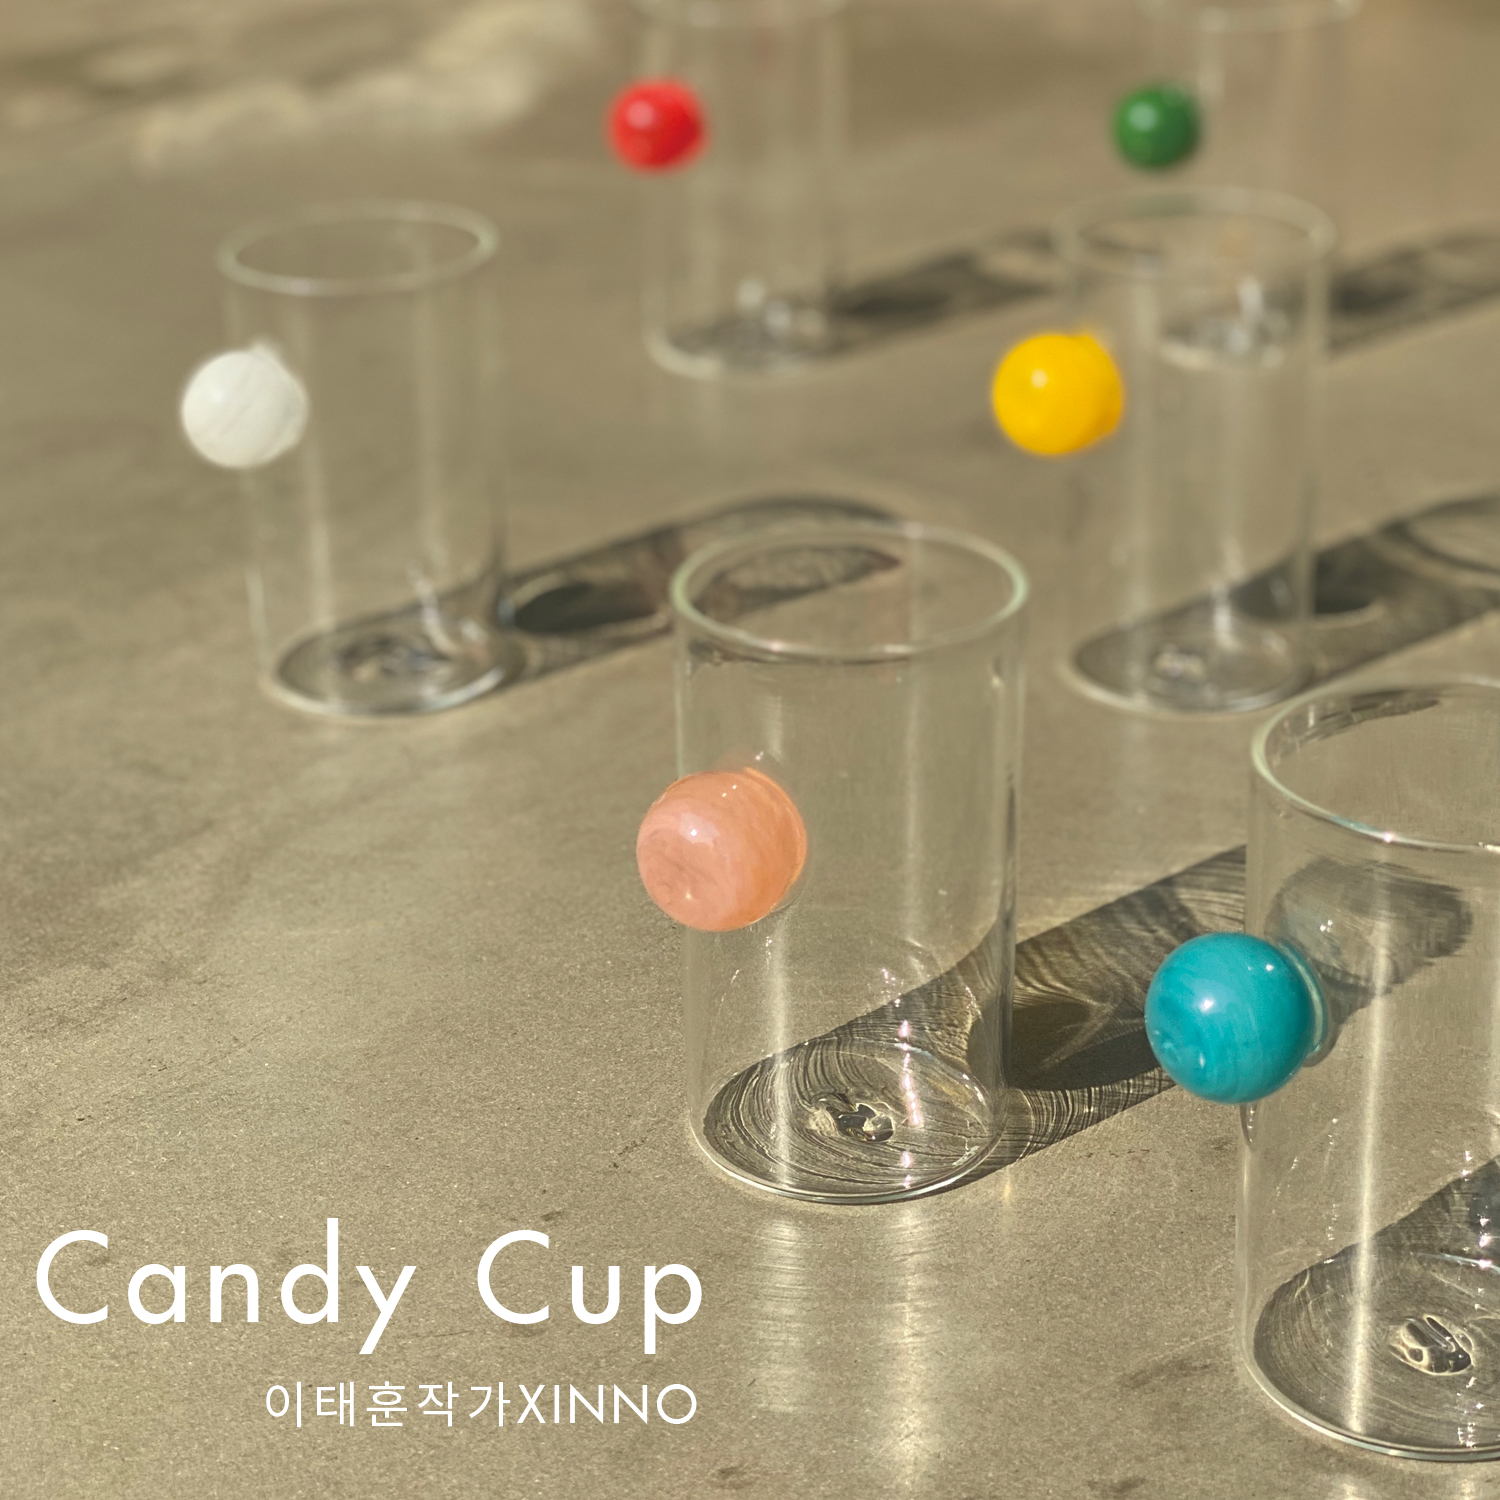 Candy Cup